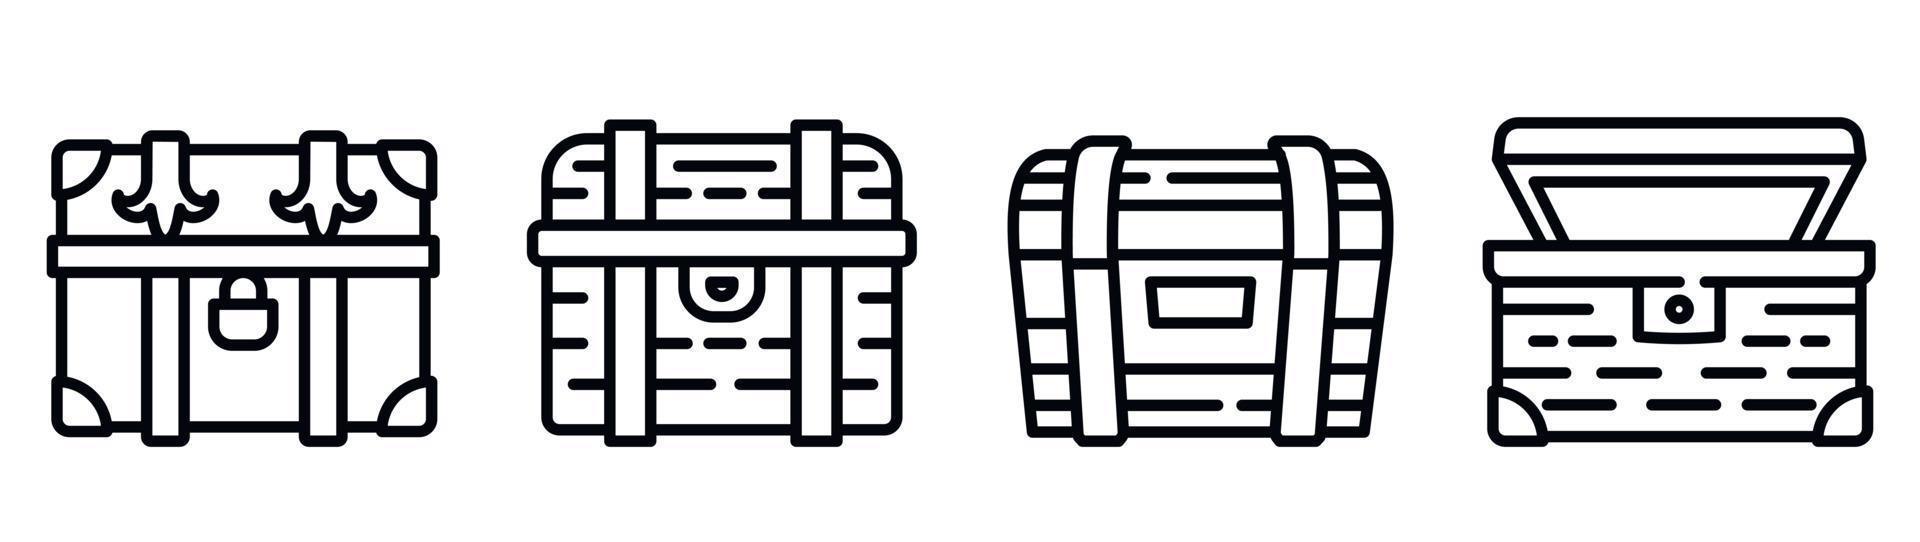 Dower chest icons set, outline style vector